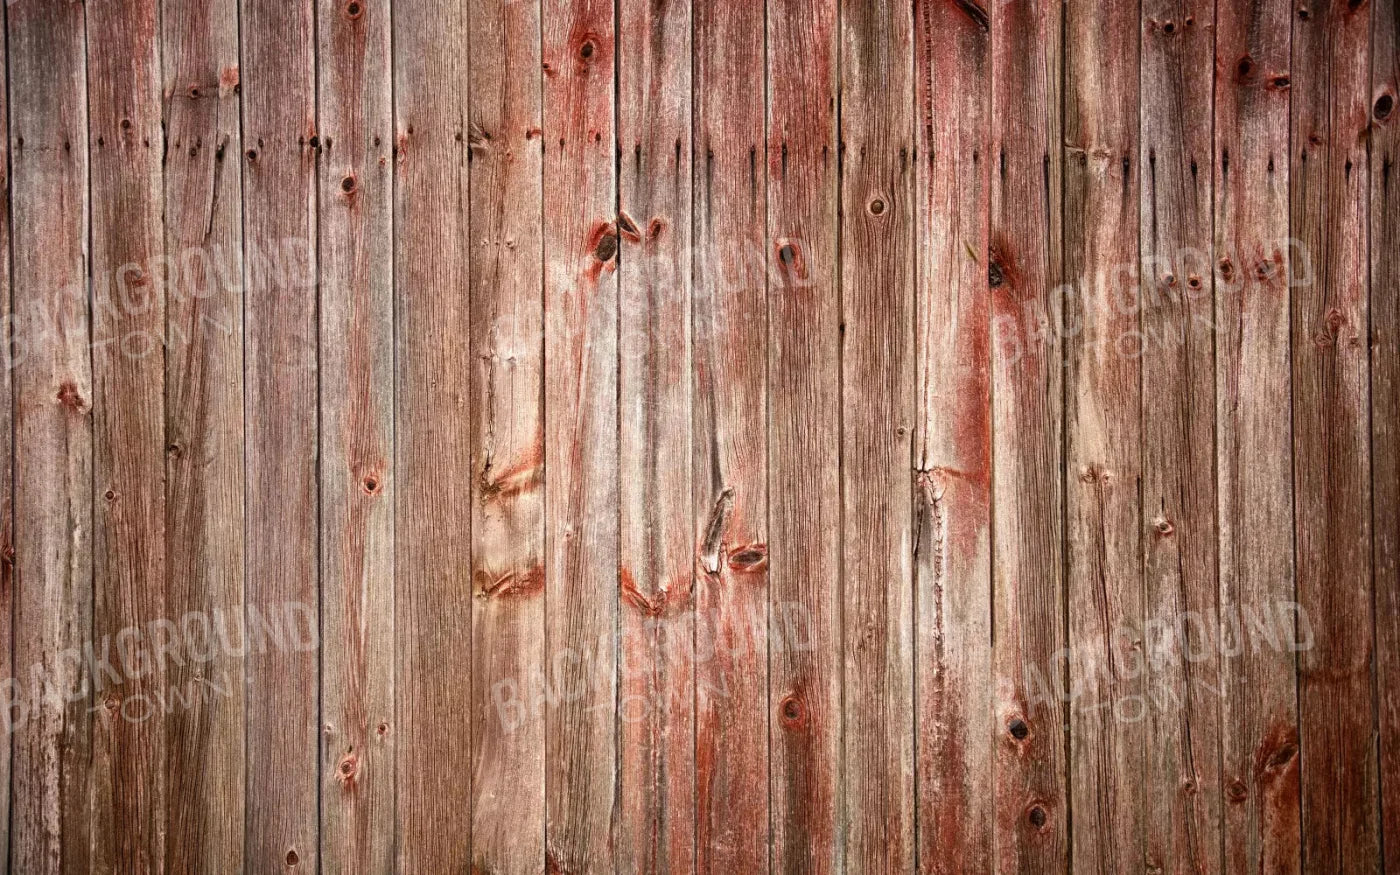 Red Wood 14X9 Ultracloth ( 168 X 108 Inch ) Backdrop